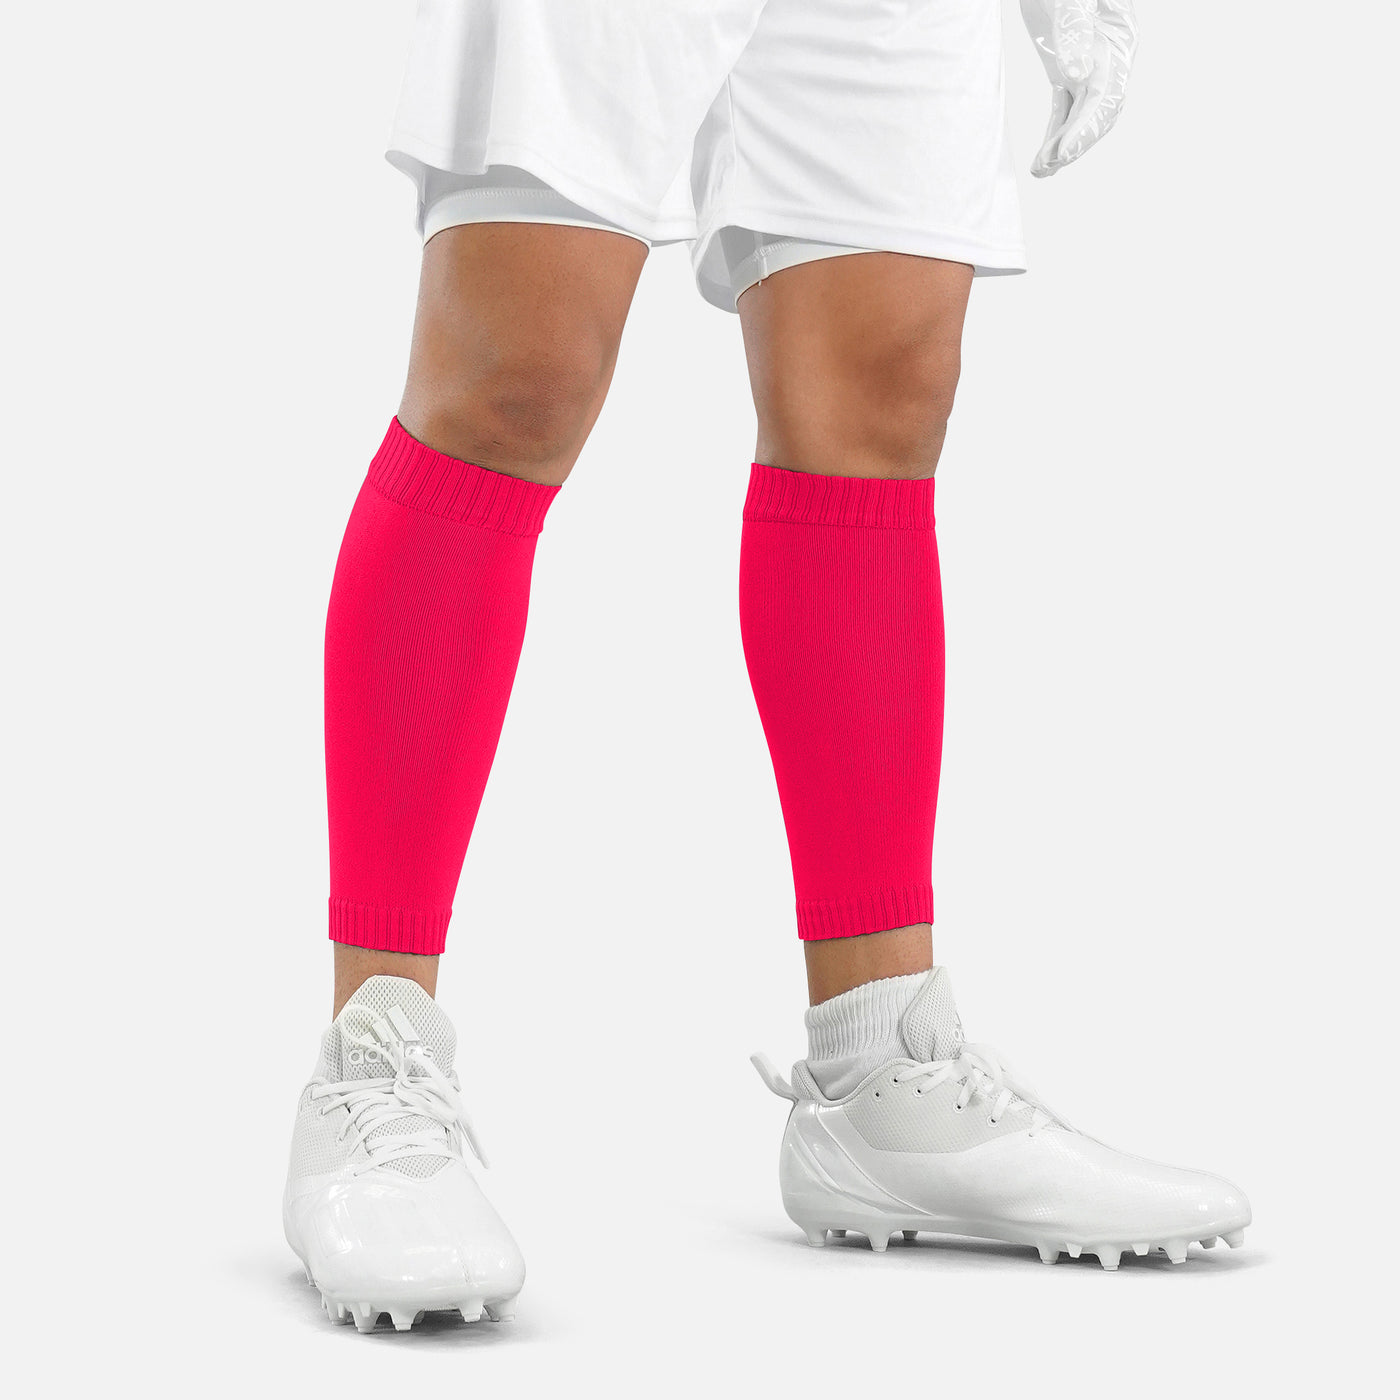 Hue Pink Knitted Compression Calf Sleeves